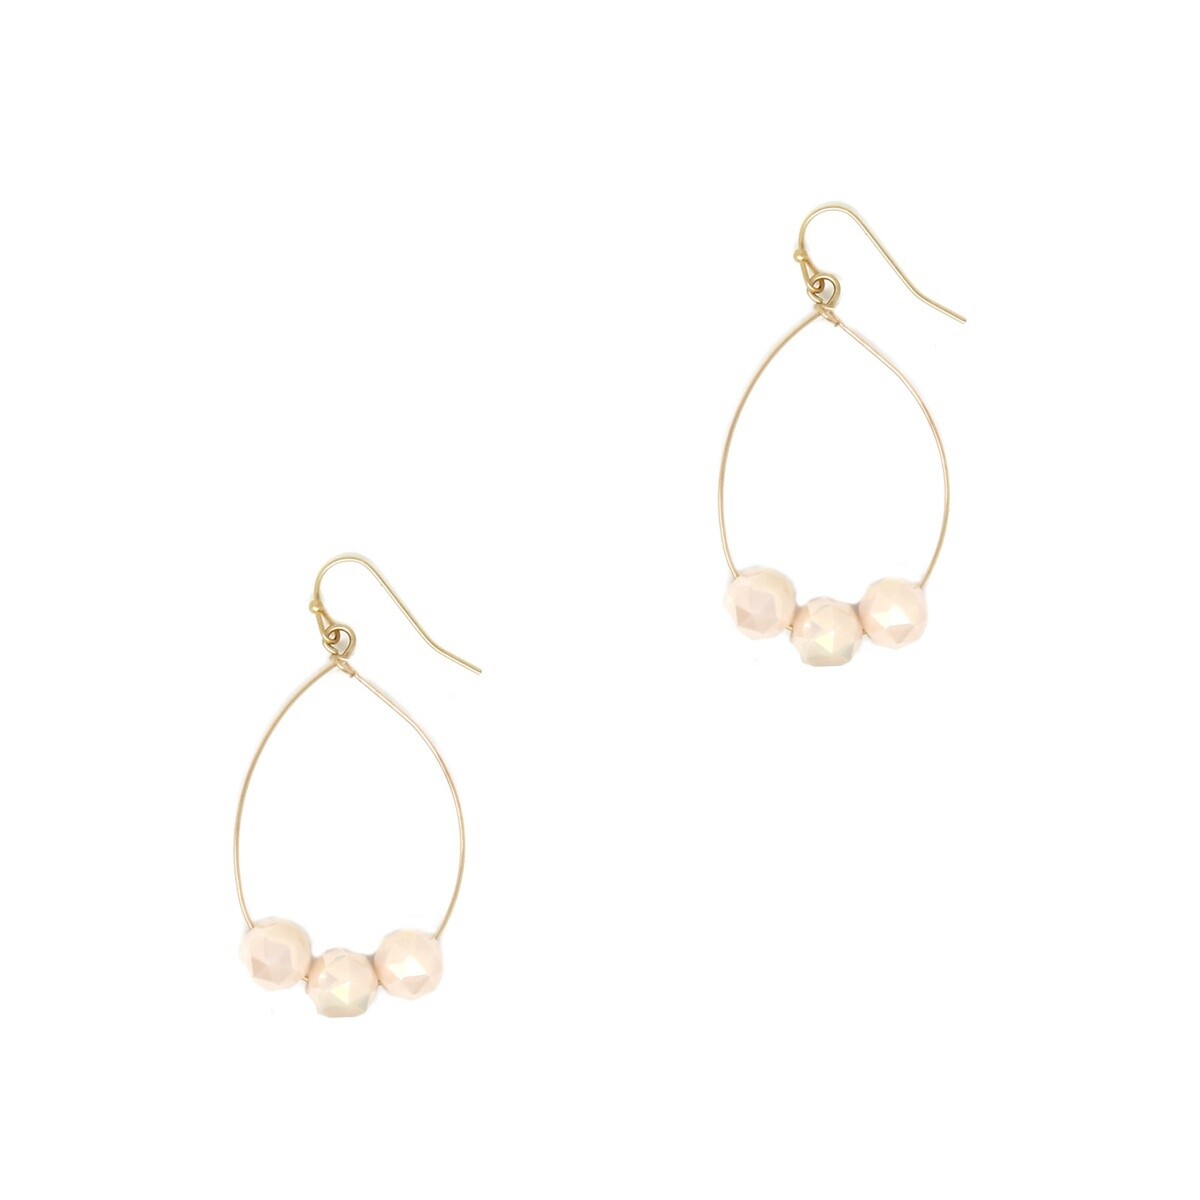 Gold Teardrop with Natural/Cream Crystal Accent Earring